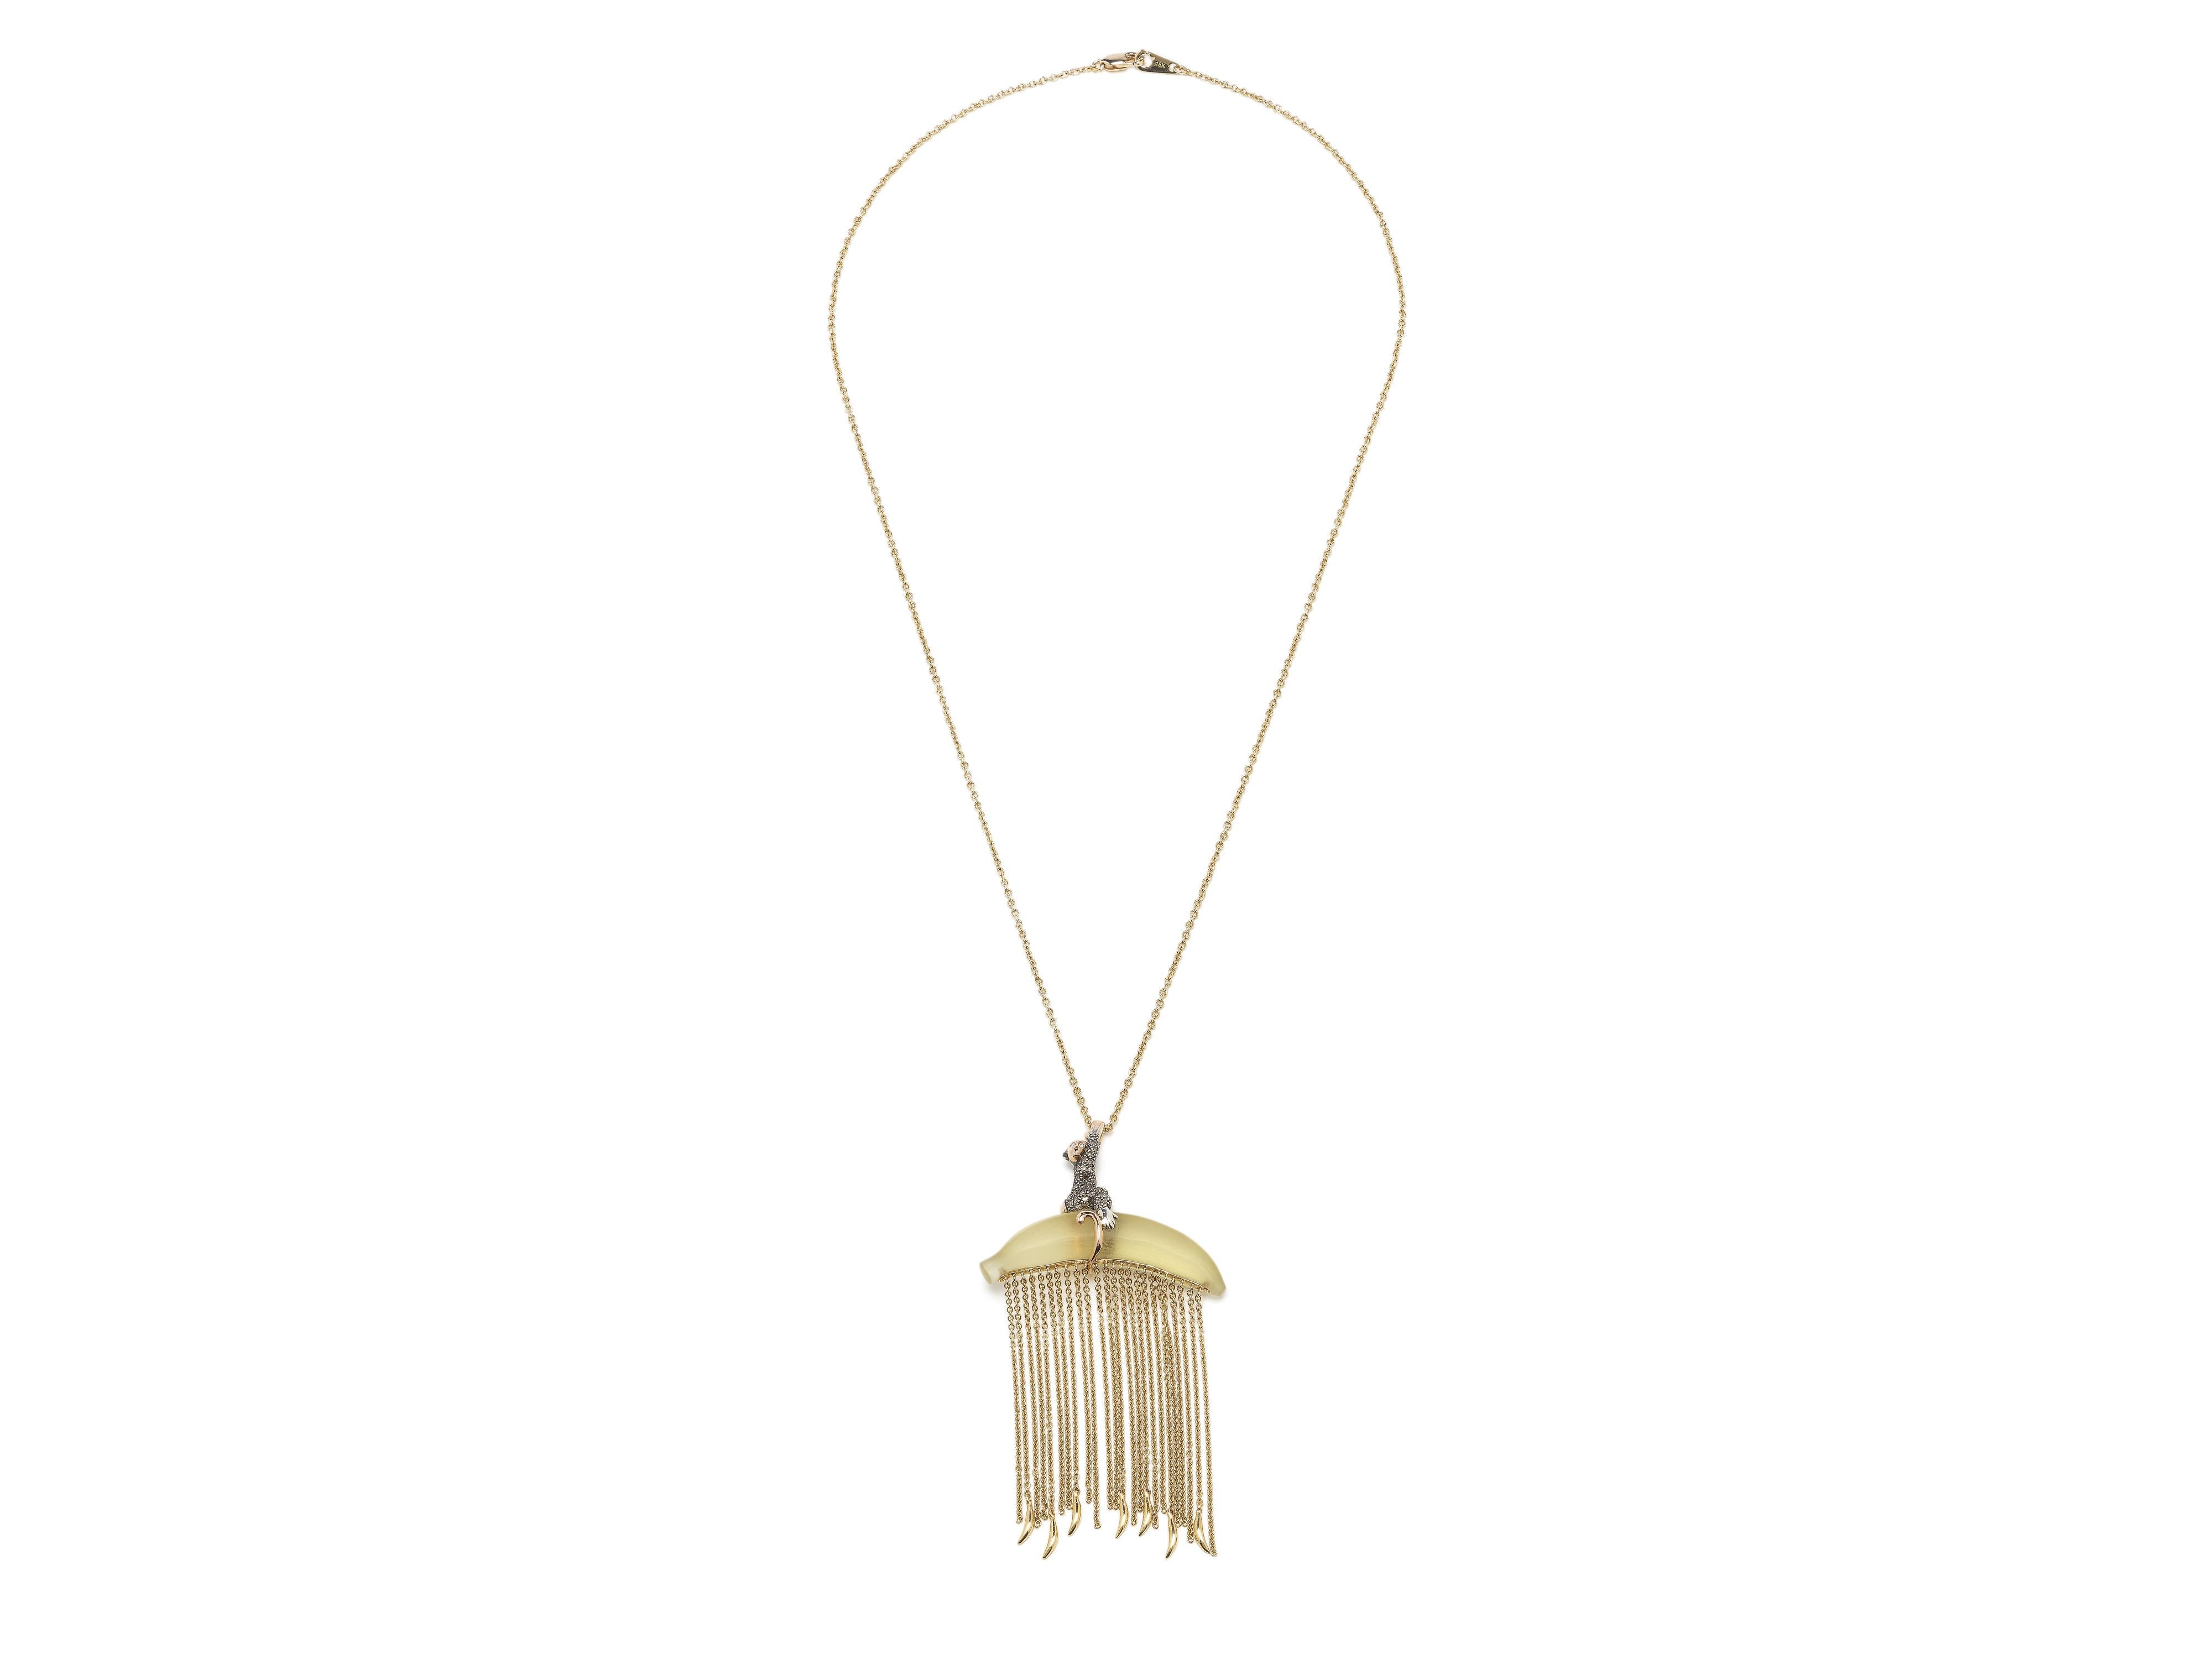 The gold fringing on this Monkey Chain Necklace lends the piece a glamorous allure. Designed in 18k rose and yellow gold, the pendant necklace is crafted as a lemon quartz banana on which sits a monkey in rose gold and sterling silver, embellished